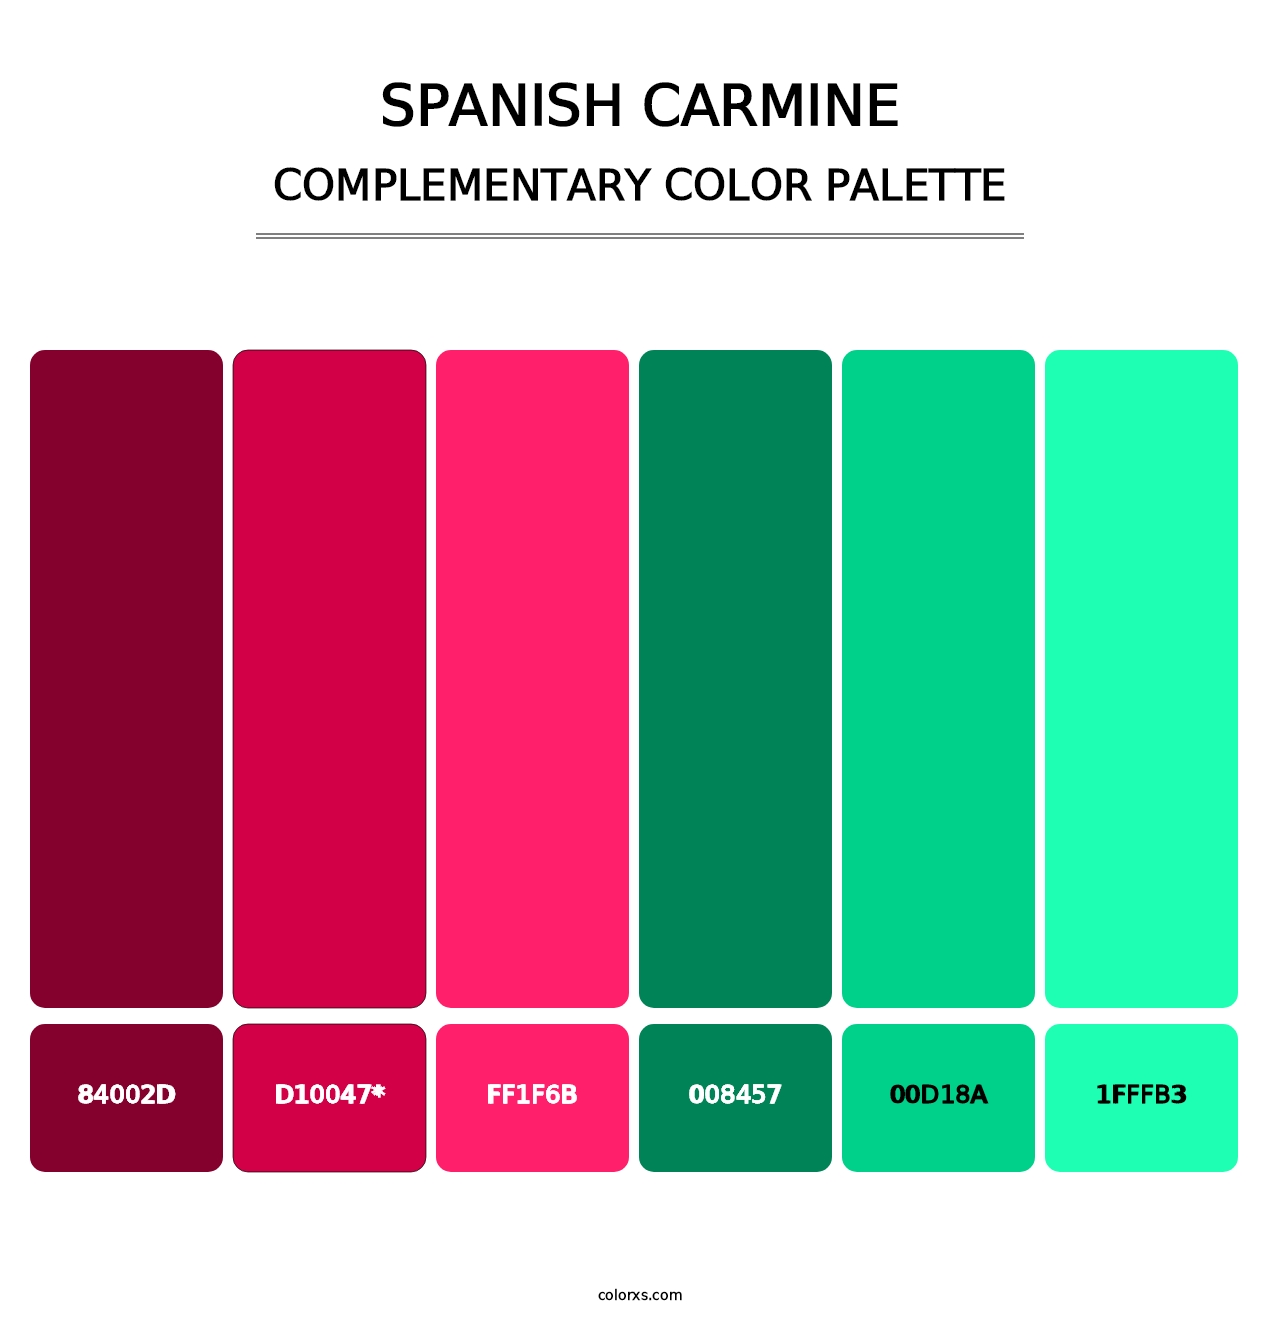 Spanish Carmine - Complementary Color Palette